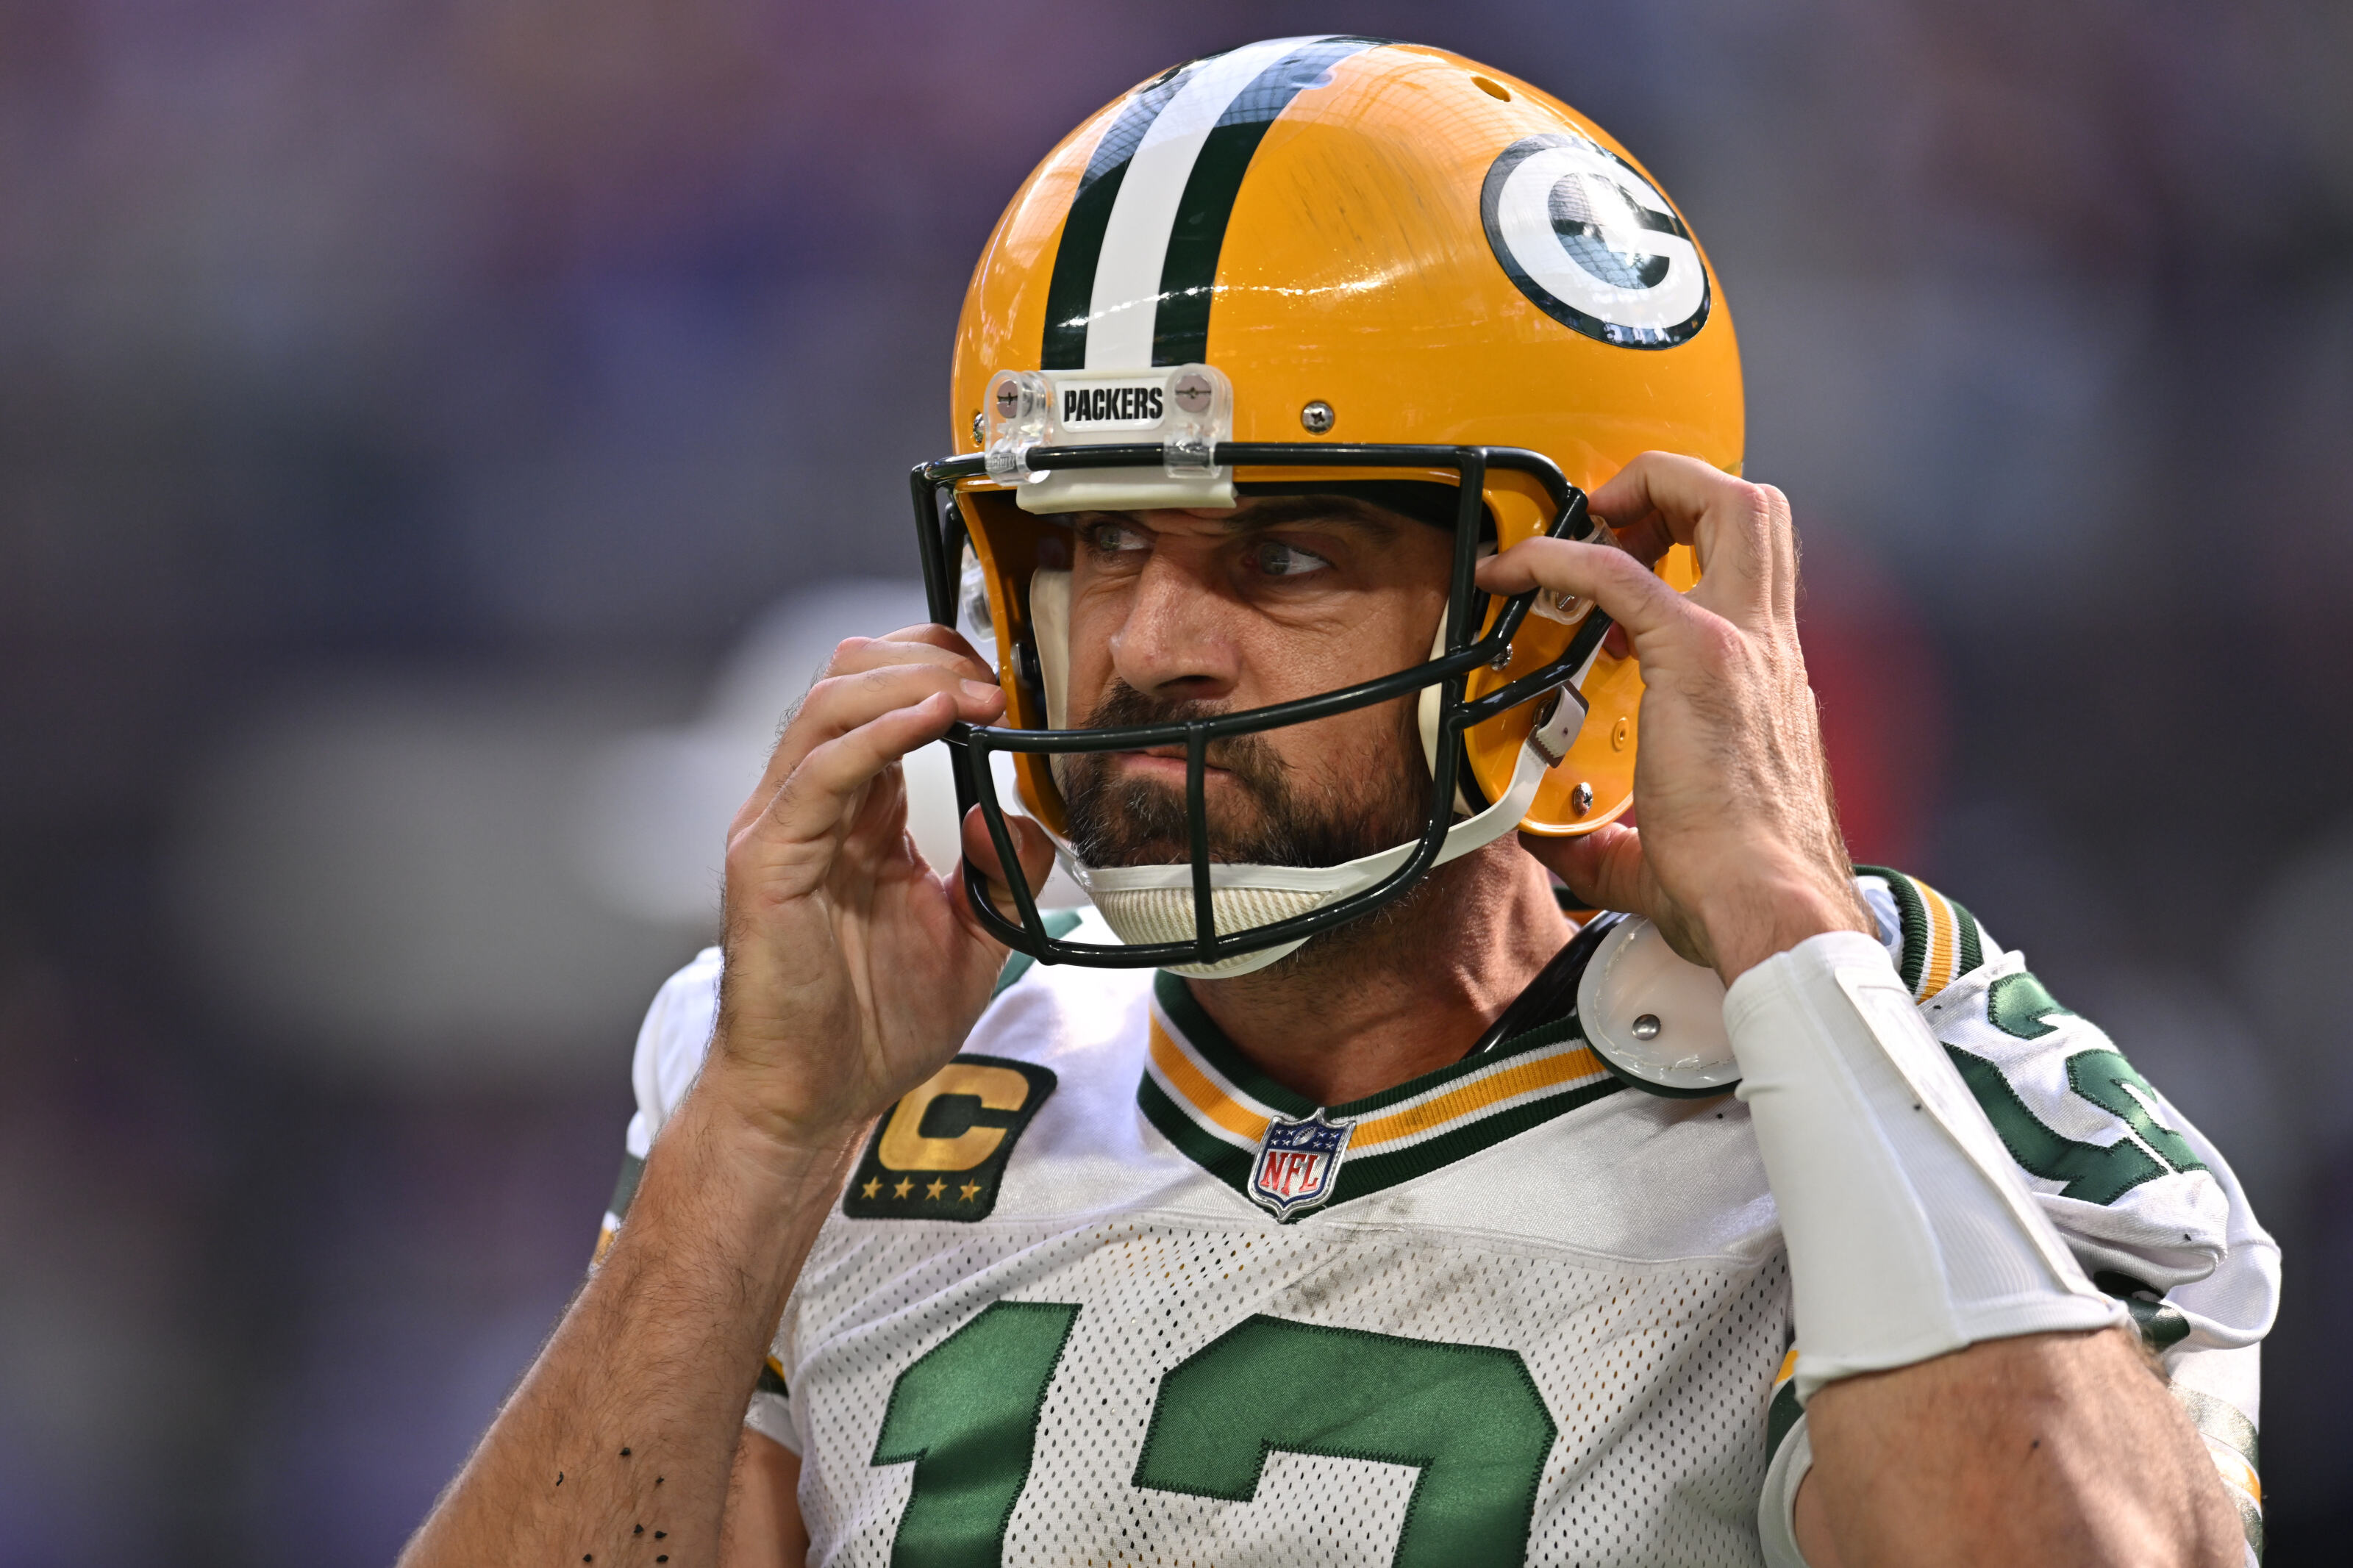 The Badger State: When will Aaron Rodgers make a decision?